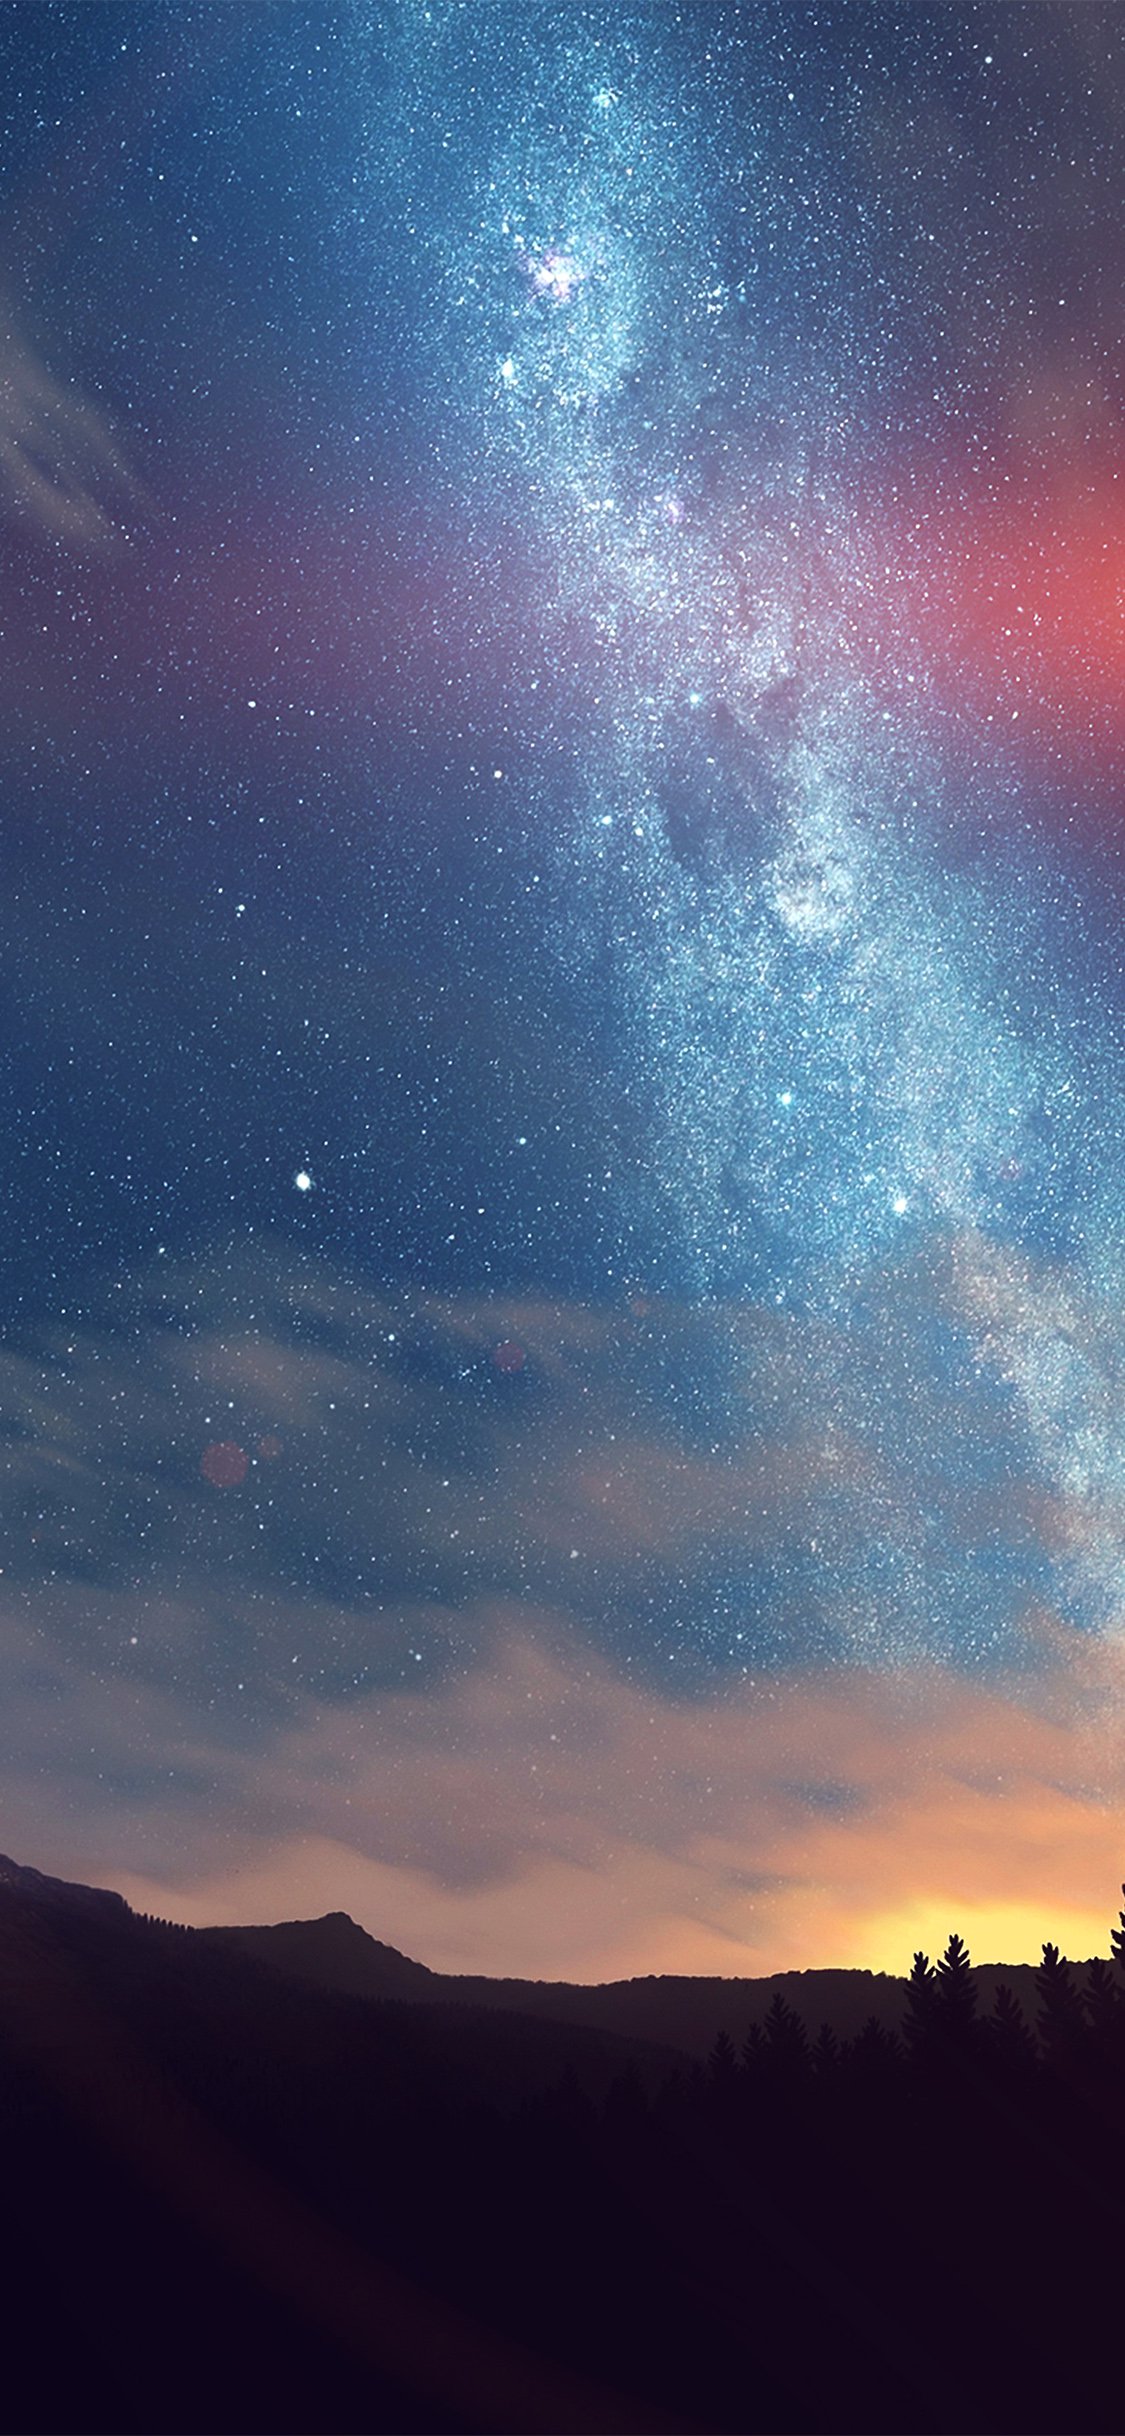 Wallpaper of the sky and space